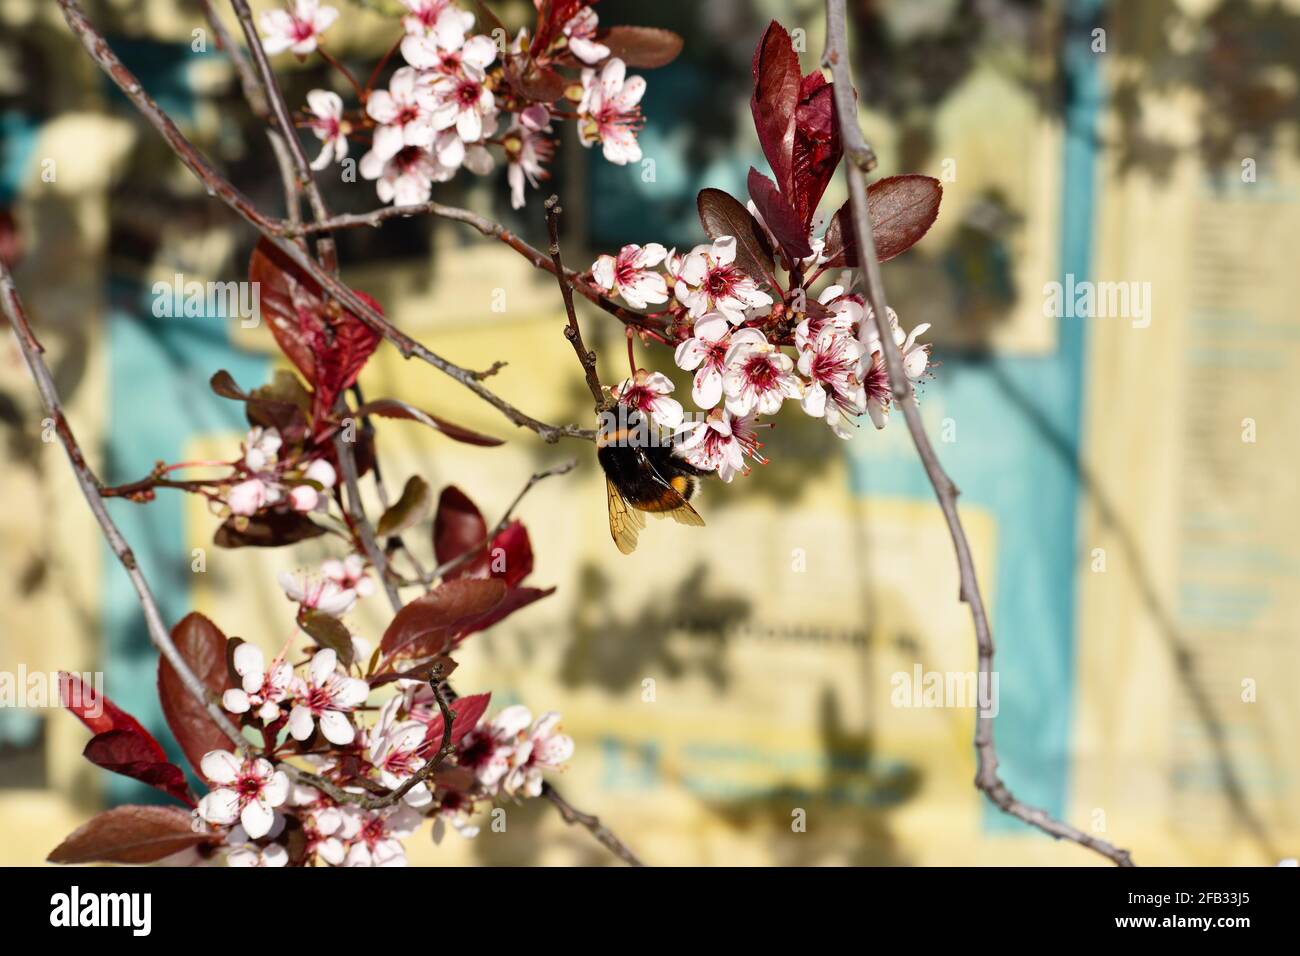 A bumble bee on a flowering cherry blossom tree Stock Photo